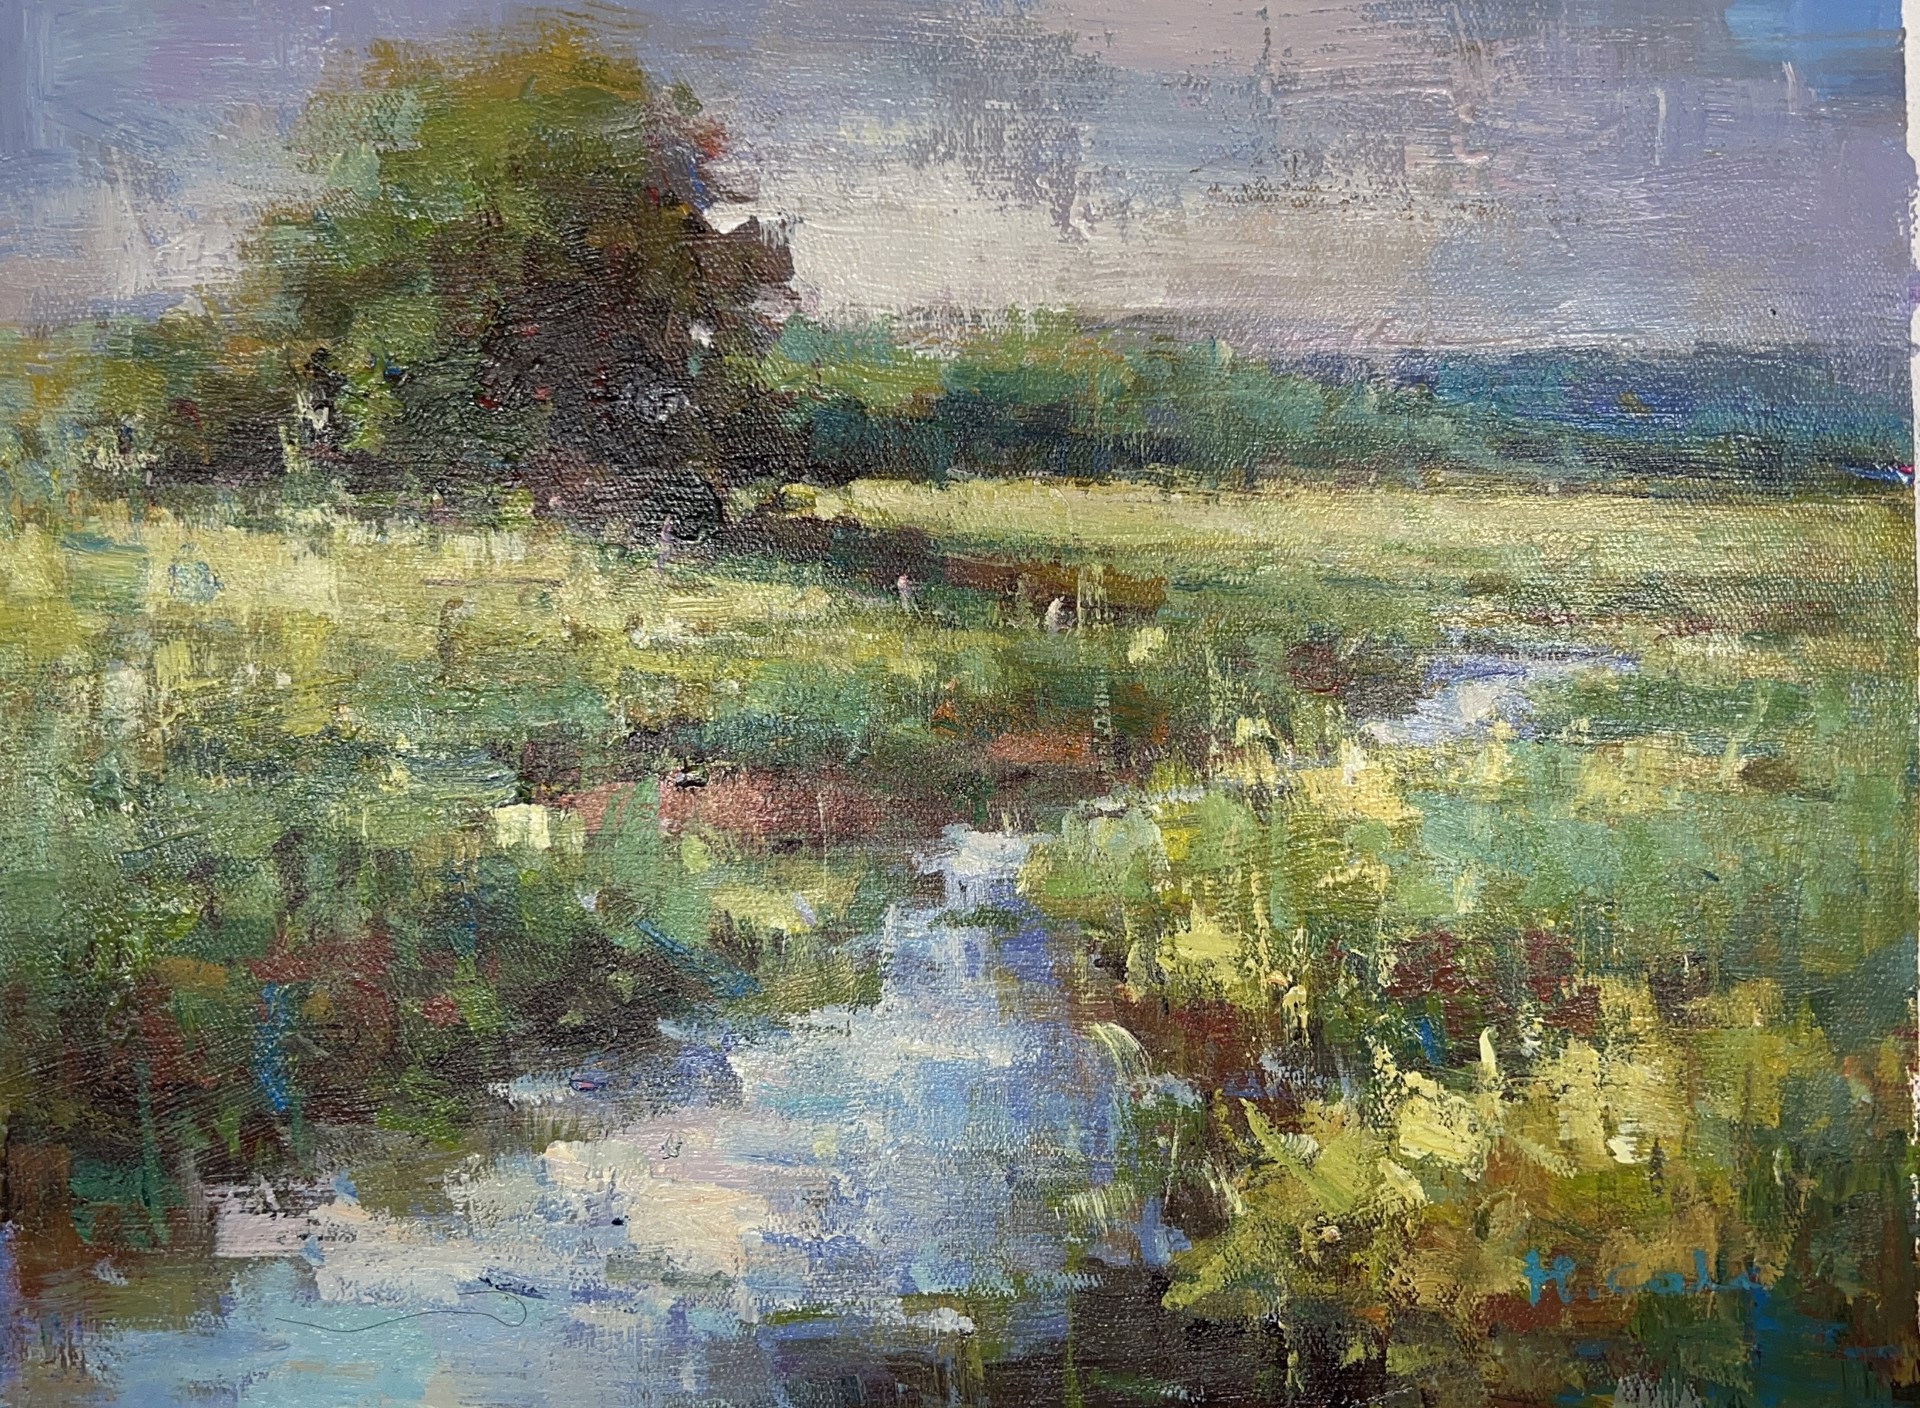 CREEK IN A MEADOW by H COLE